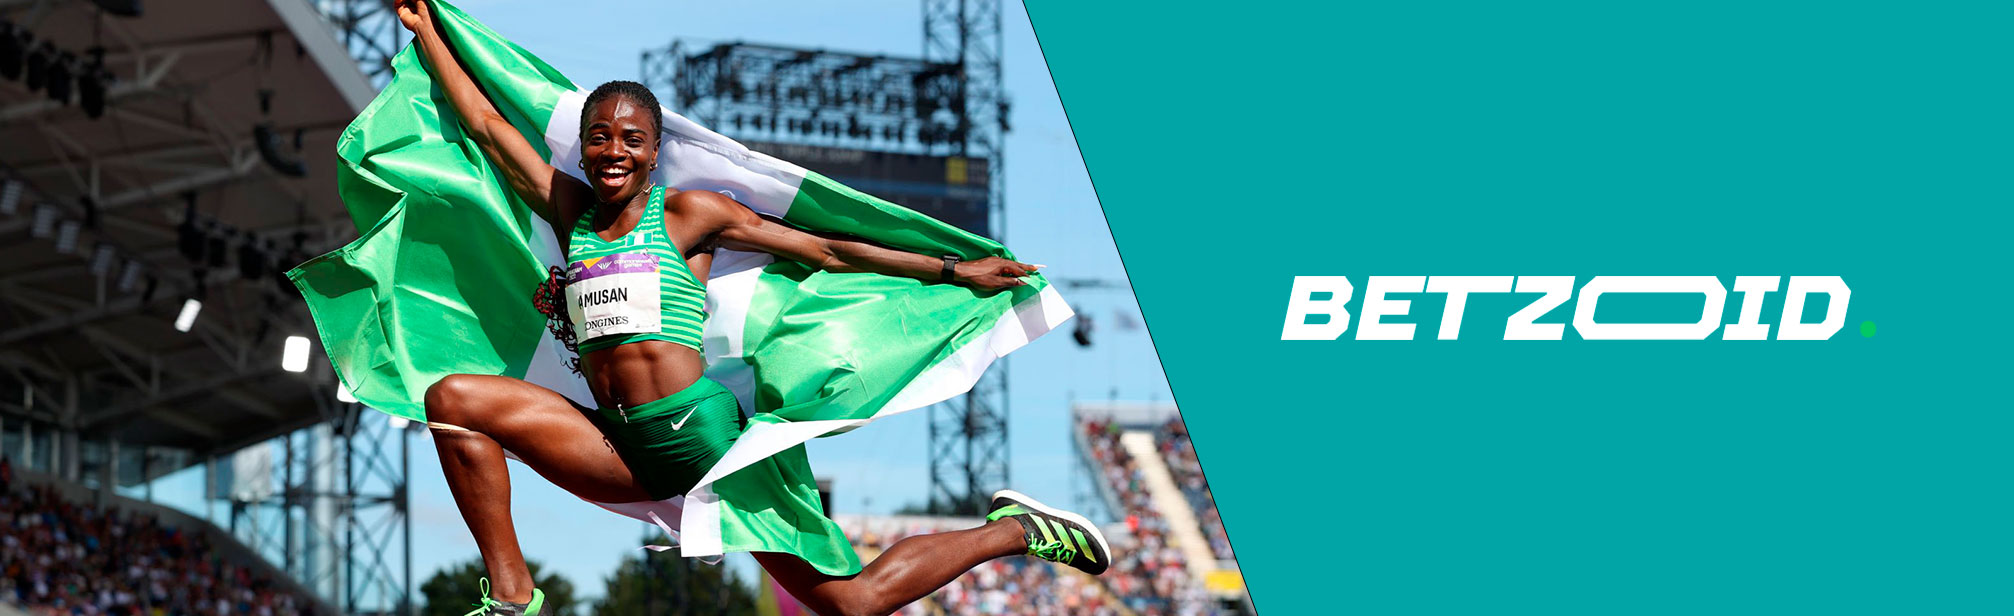 Nigerian sportsman with flag and Betzoid logo.